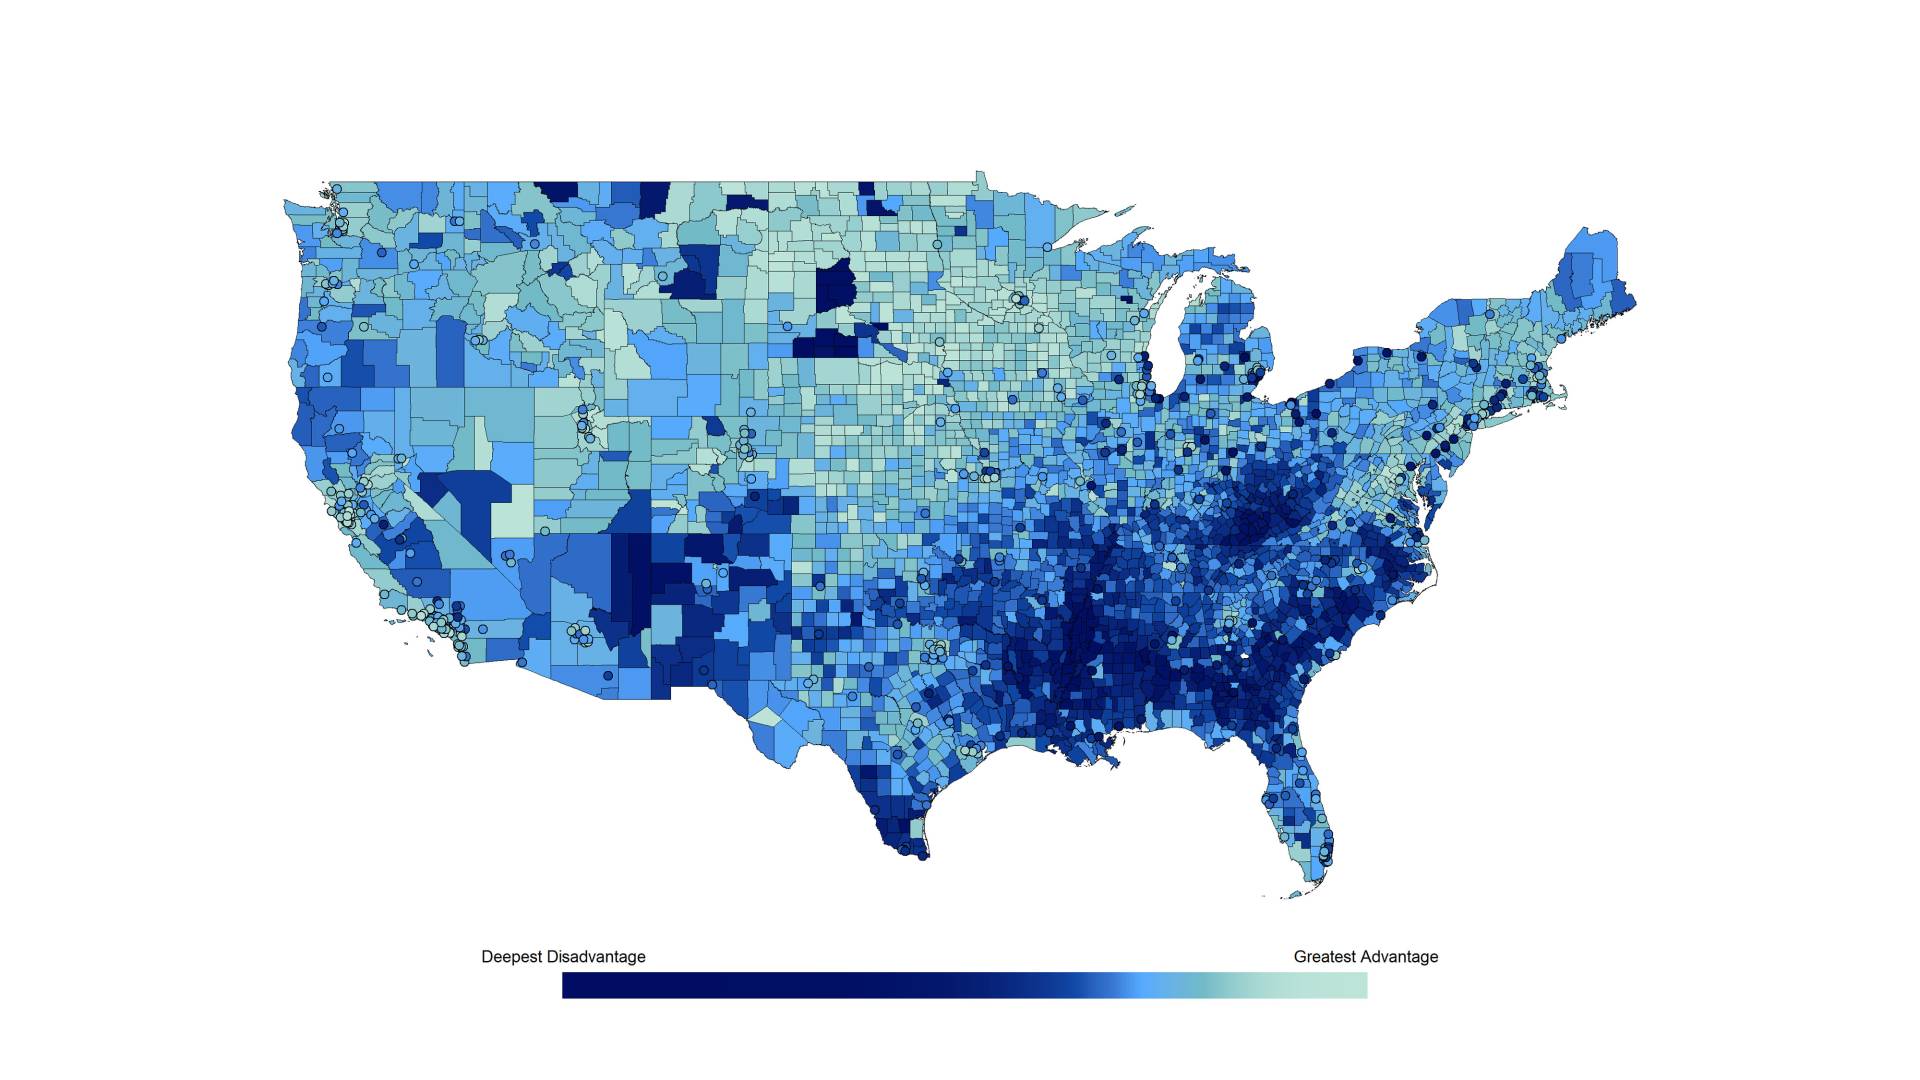 U.S. Map of Disadvantage shows the clusters of poverty in the southeast and midwest